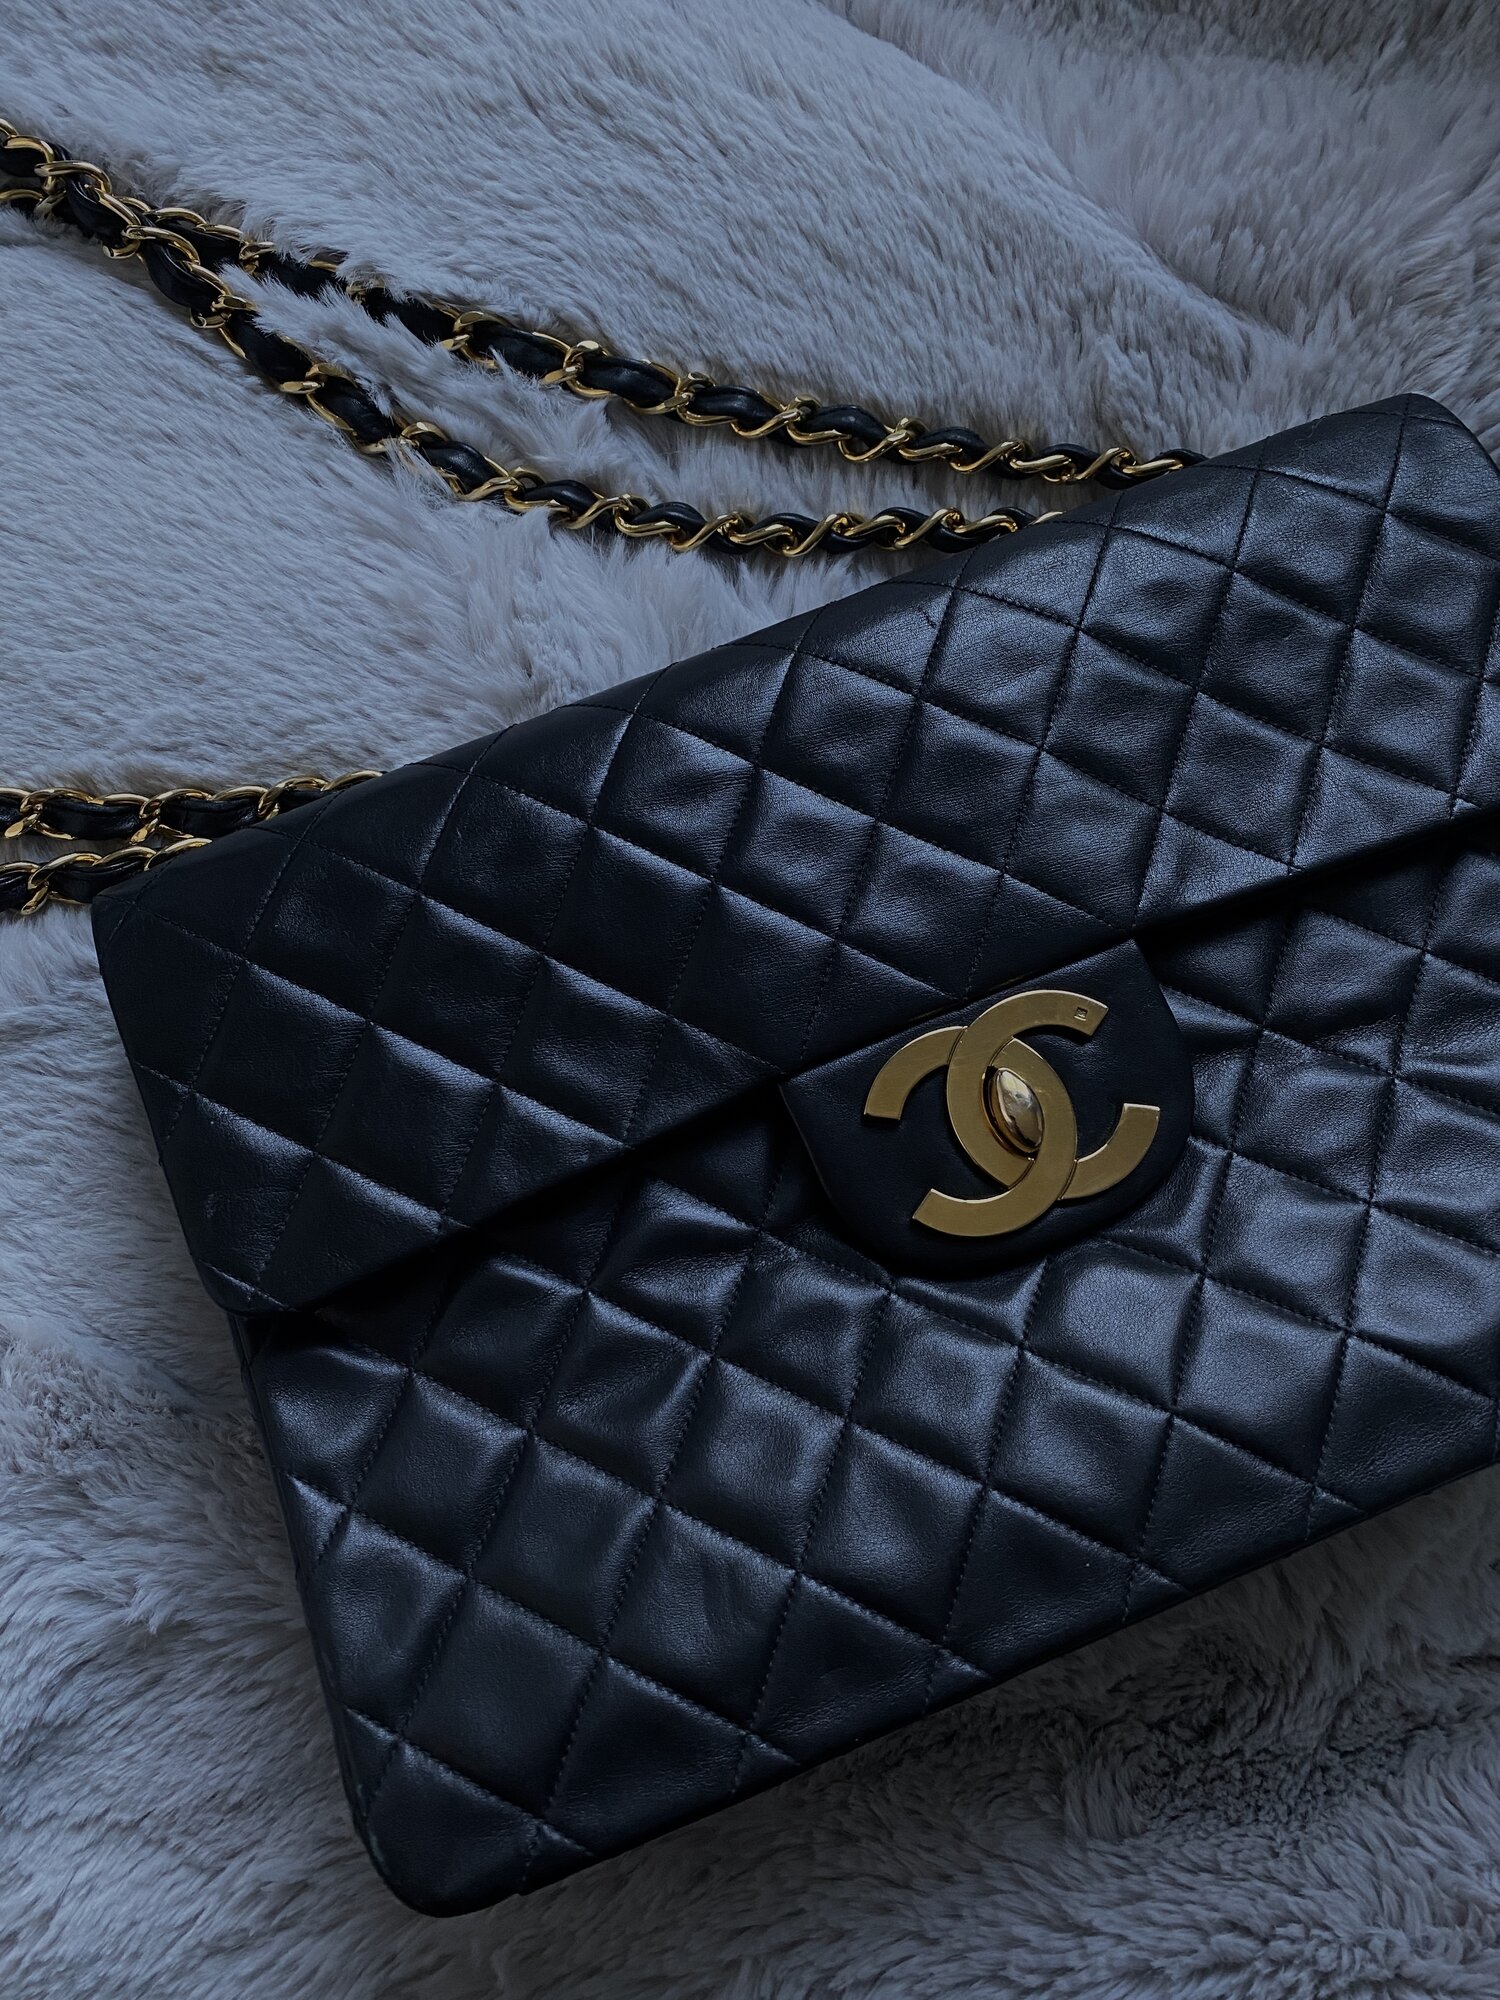 The Open for Vintage Guide To Authenticating A Vintage Chanel Flap Bag